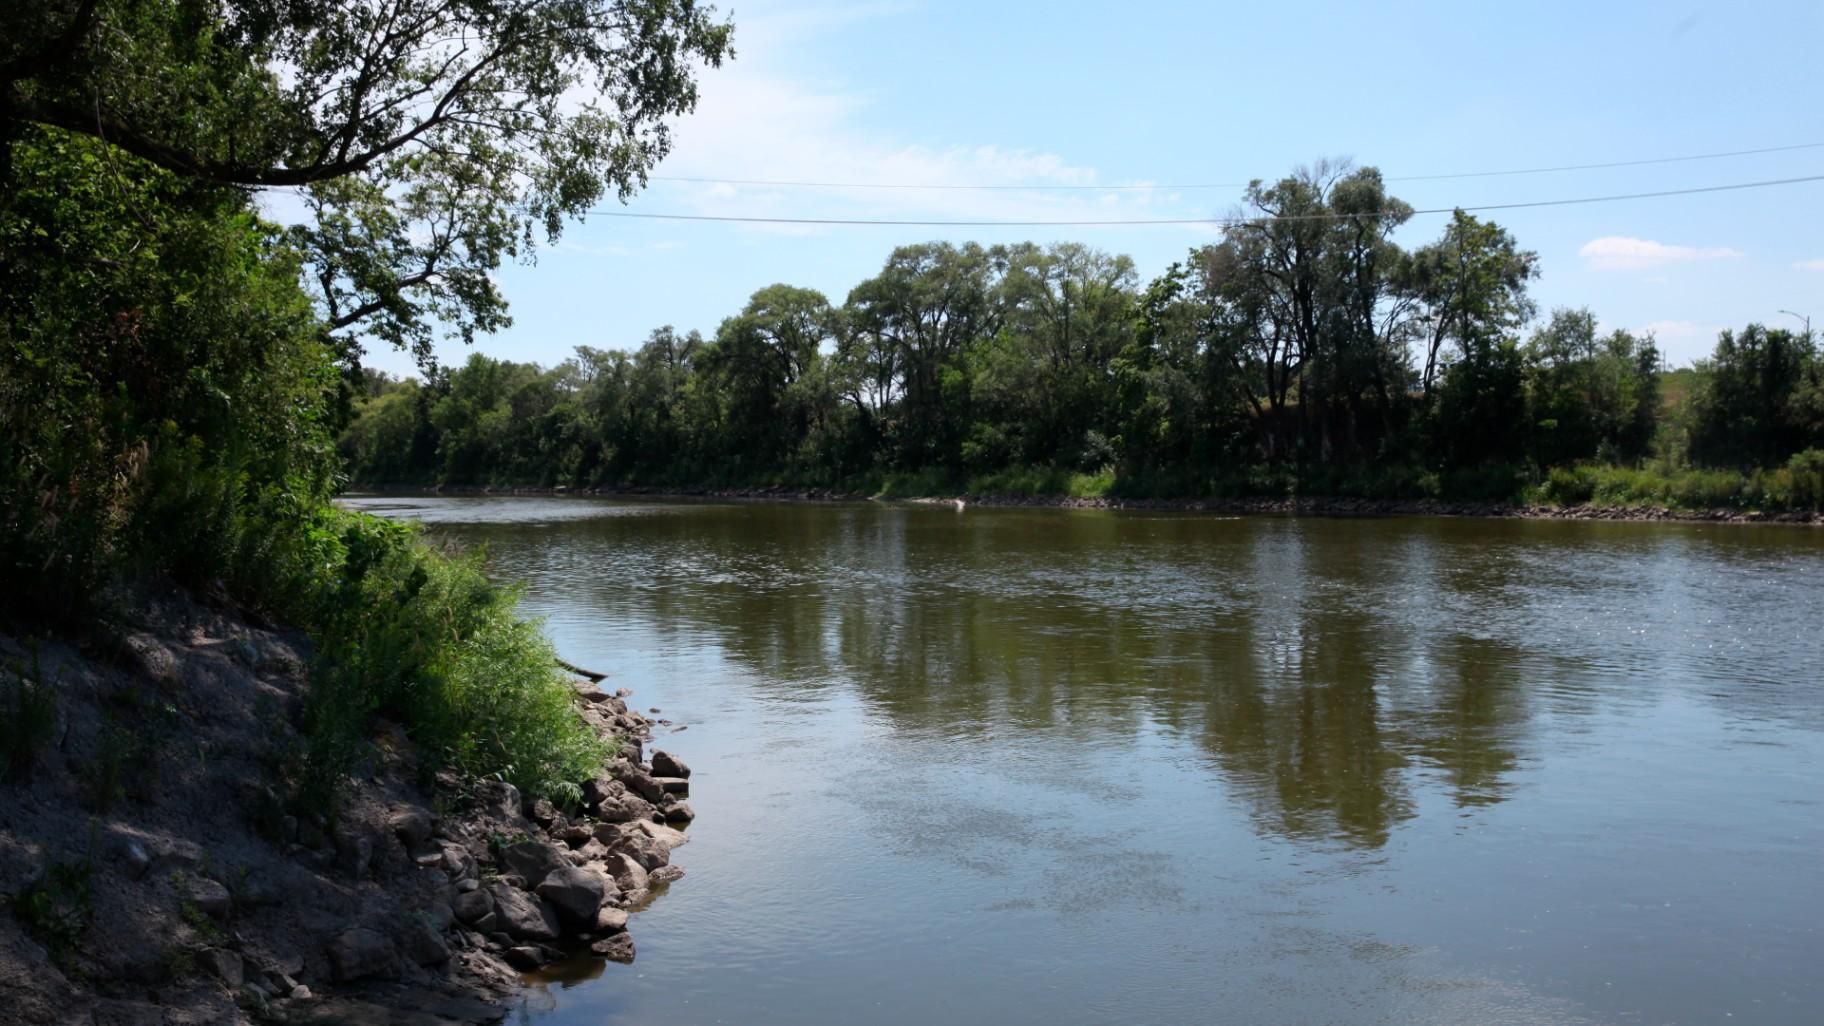  The Elkhorn River, just west of Omaha, Neb., is pictured on Thursday, Aug. 18, 2022. (AP Photo / Josh Funk)